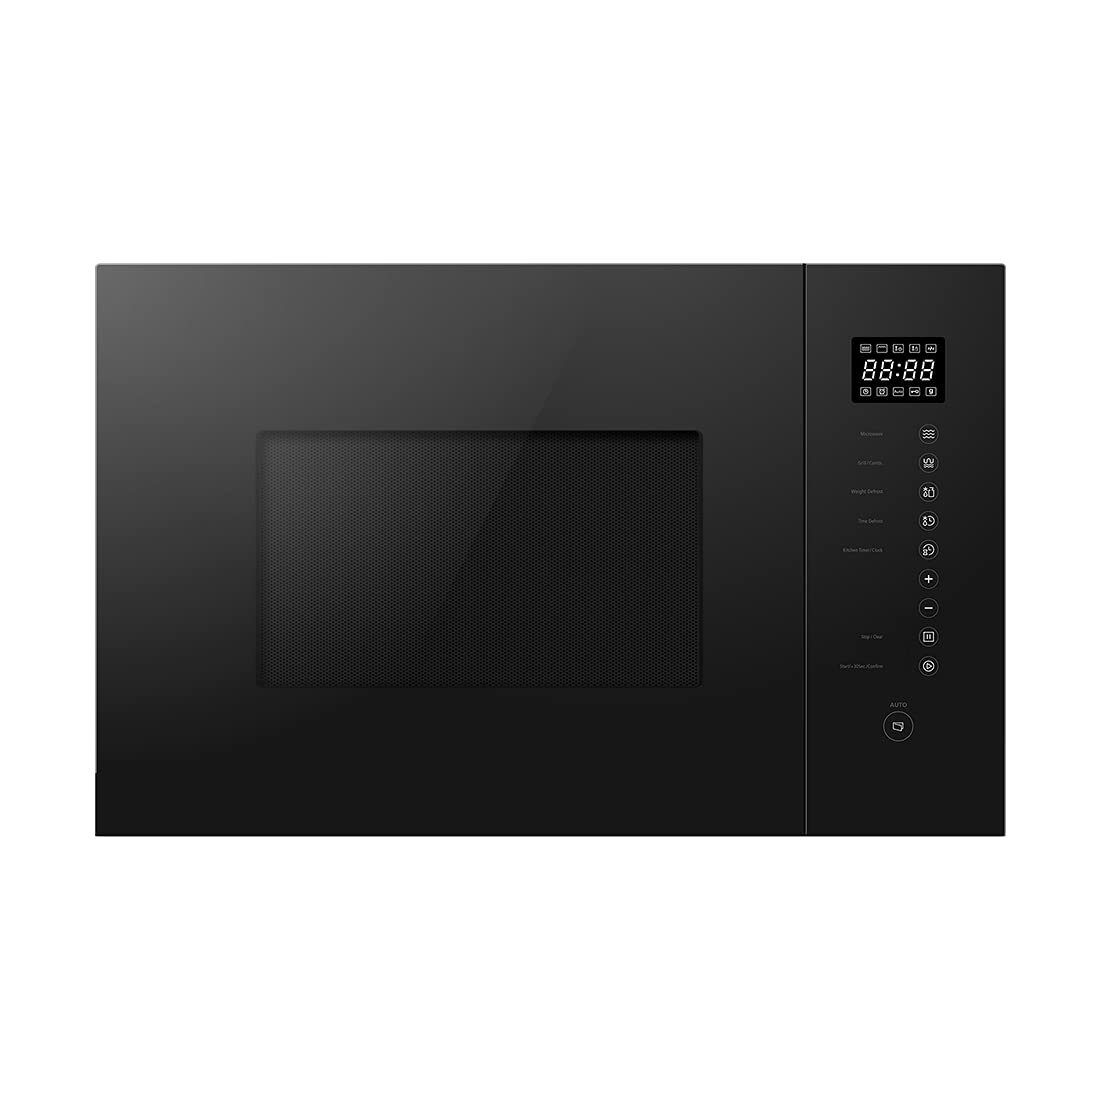 Kaff covection oven with multi-programming mode